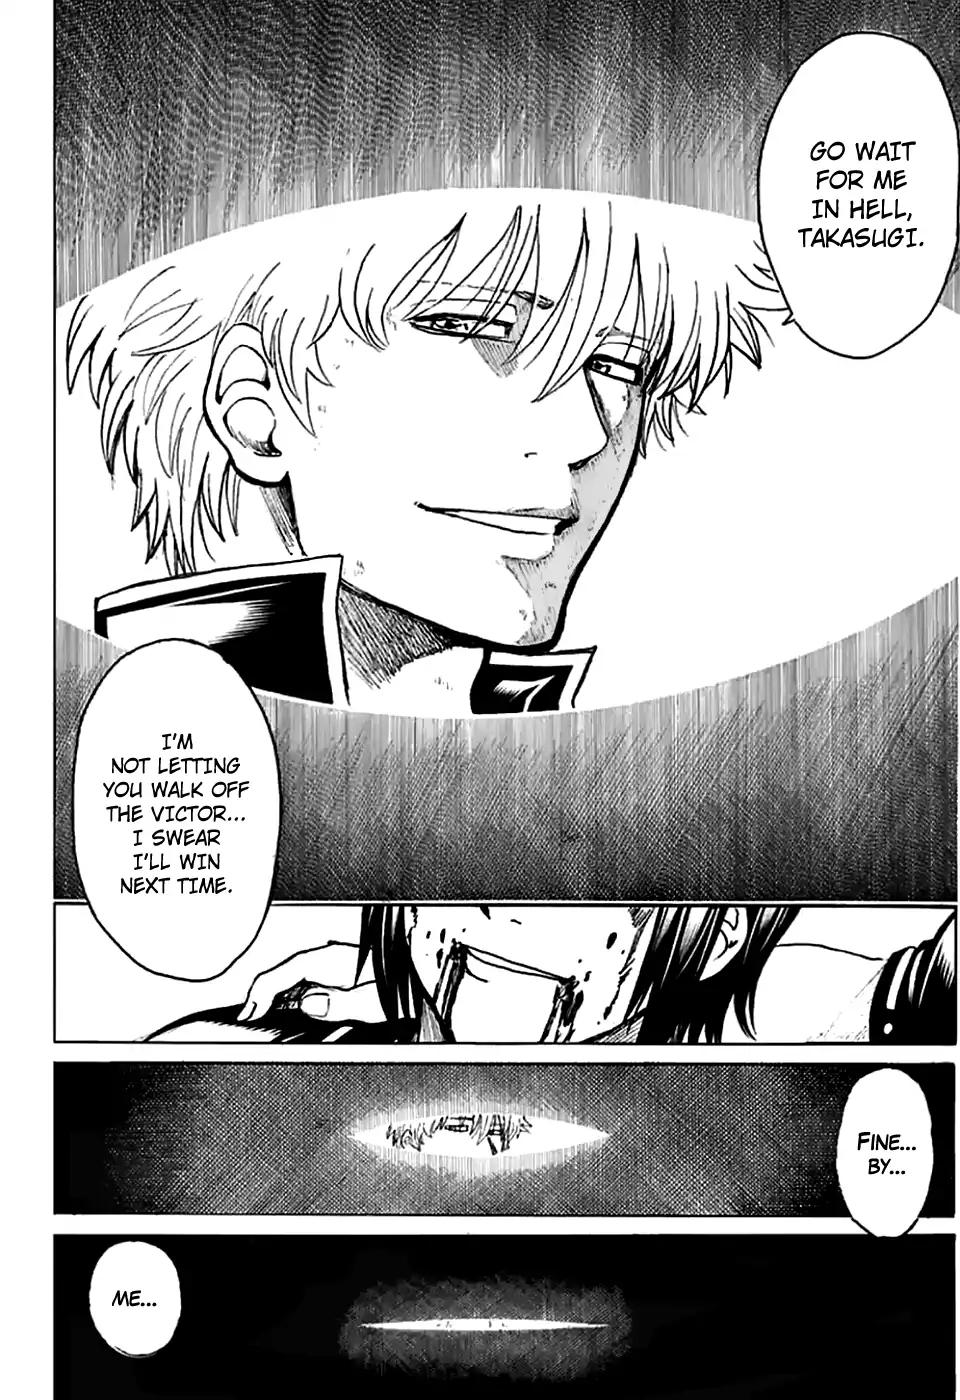 Gintama chapter 703 page 39